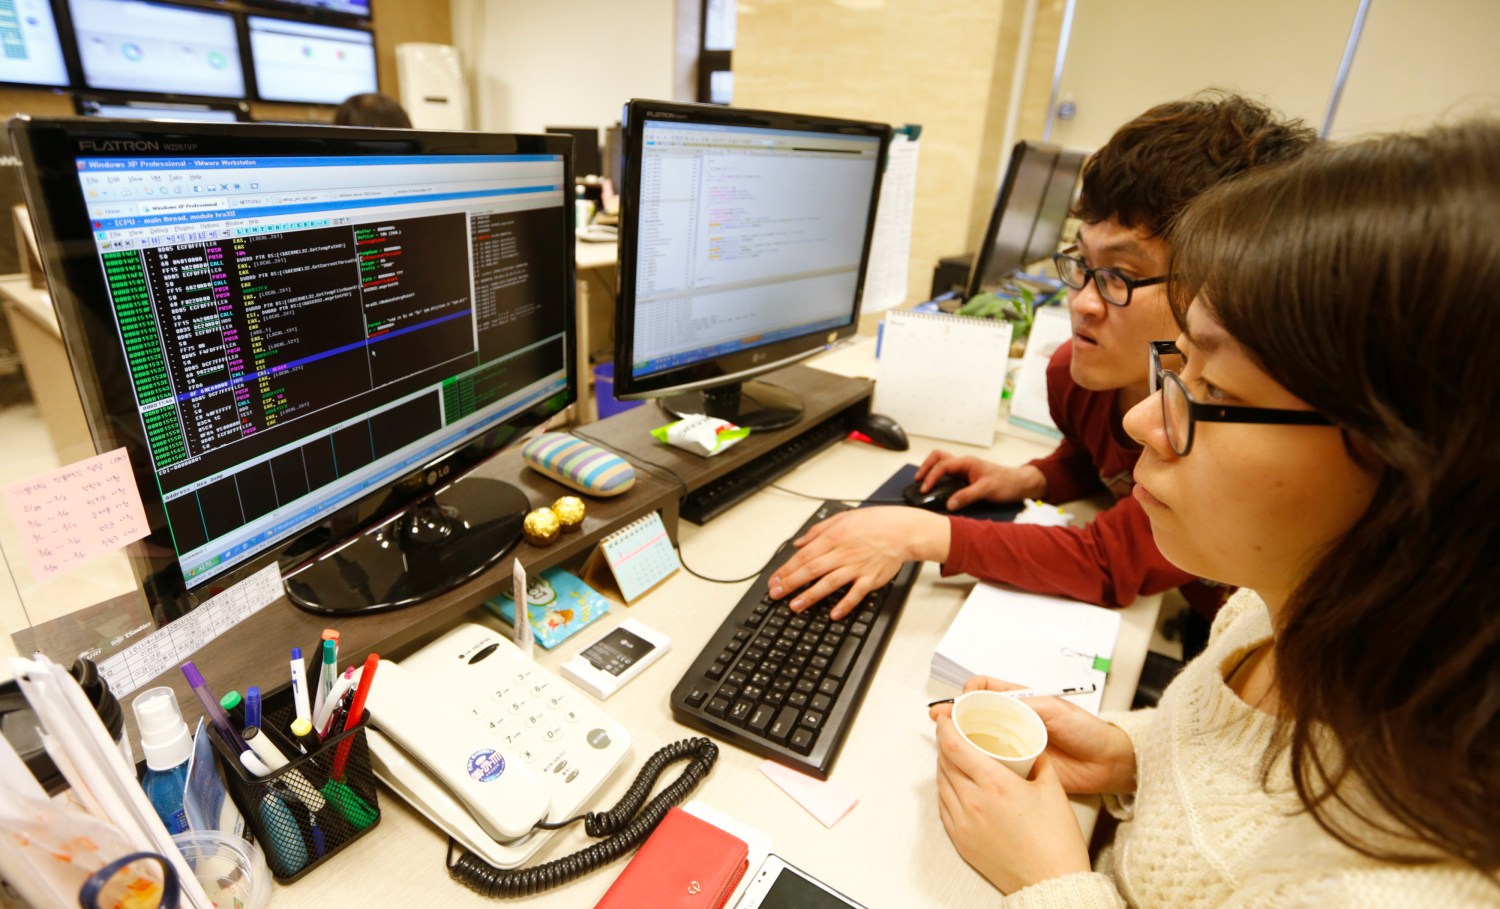 Researchers of Hauri, an IT security software company investigating computer viruses, work at their lab in the company in Seoul March 22, 2013. This week's cyber-attack on South Korean broadcasters and banks may not have originated in China after all as the IP address has been traced to one of the victim banks, the communications regulator said on Friday.  REUTERS/Lee Jae-Won (SOUTH KOREA - Tags: SCIENCE TECHNOLOGY CRIME LAW BUSINESS TELECOMS) - GM1E93M1BKH01